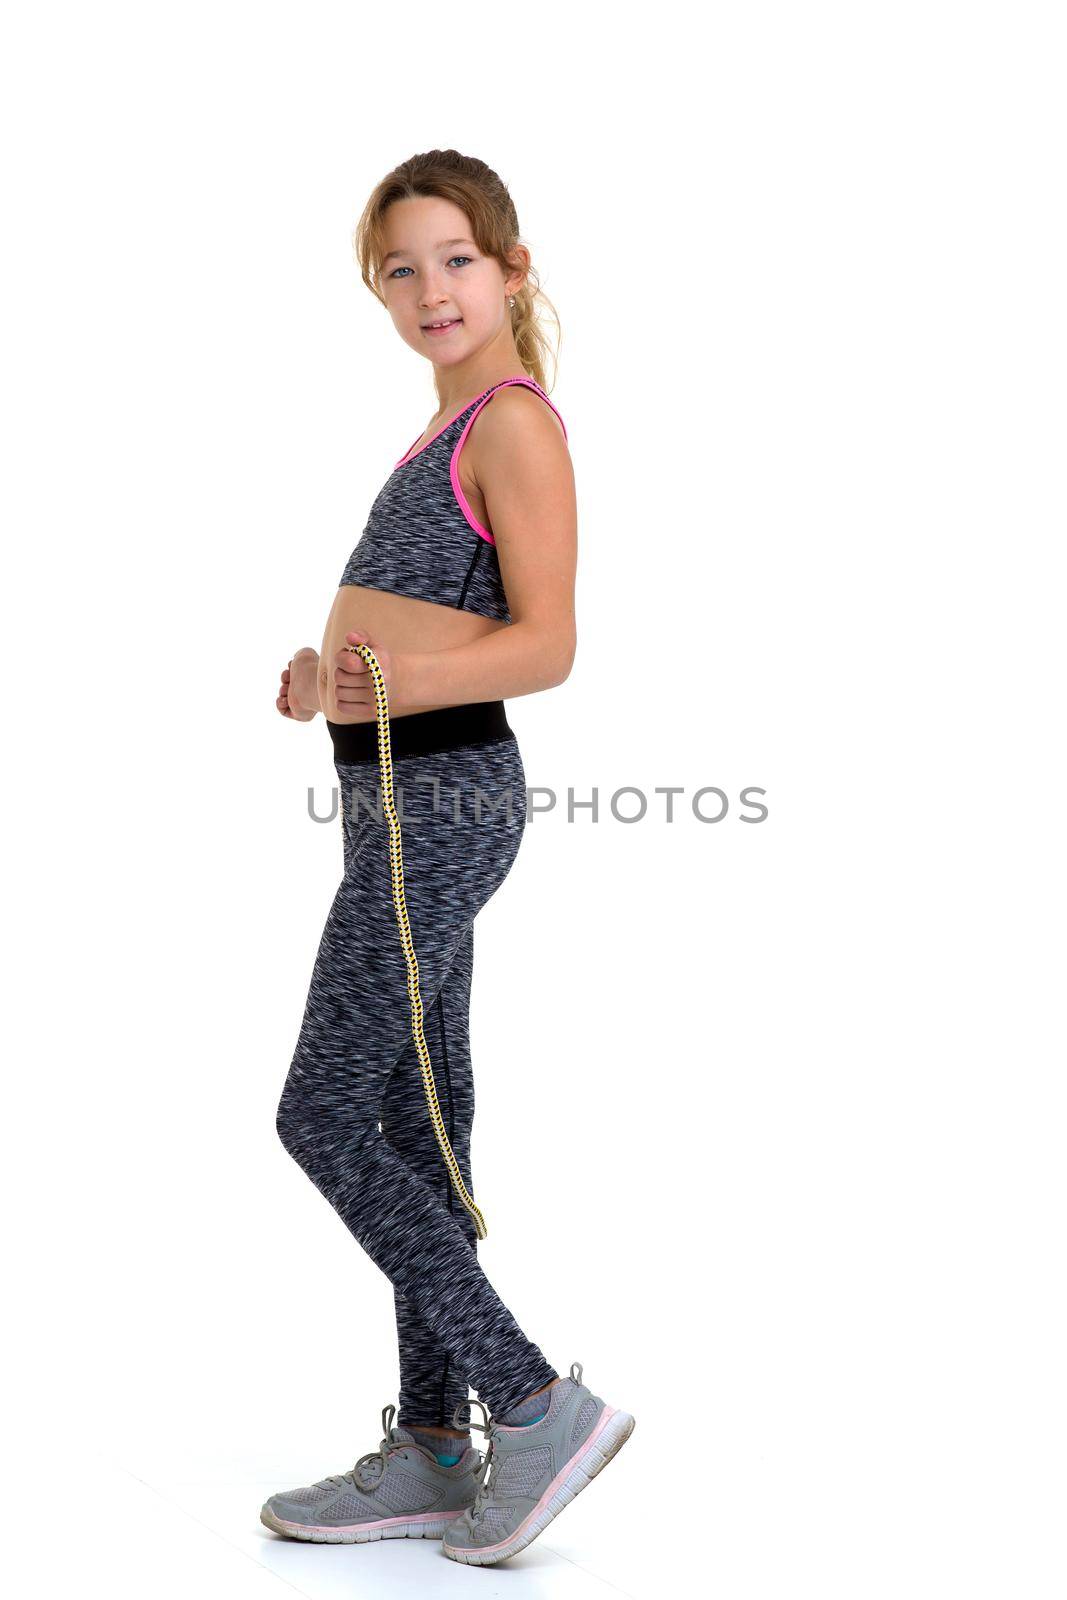 Girl performing exercise with jumping rope. Studio portrait. by kolesnikov_studio